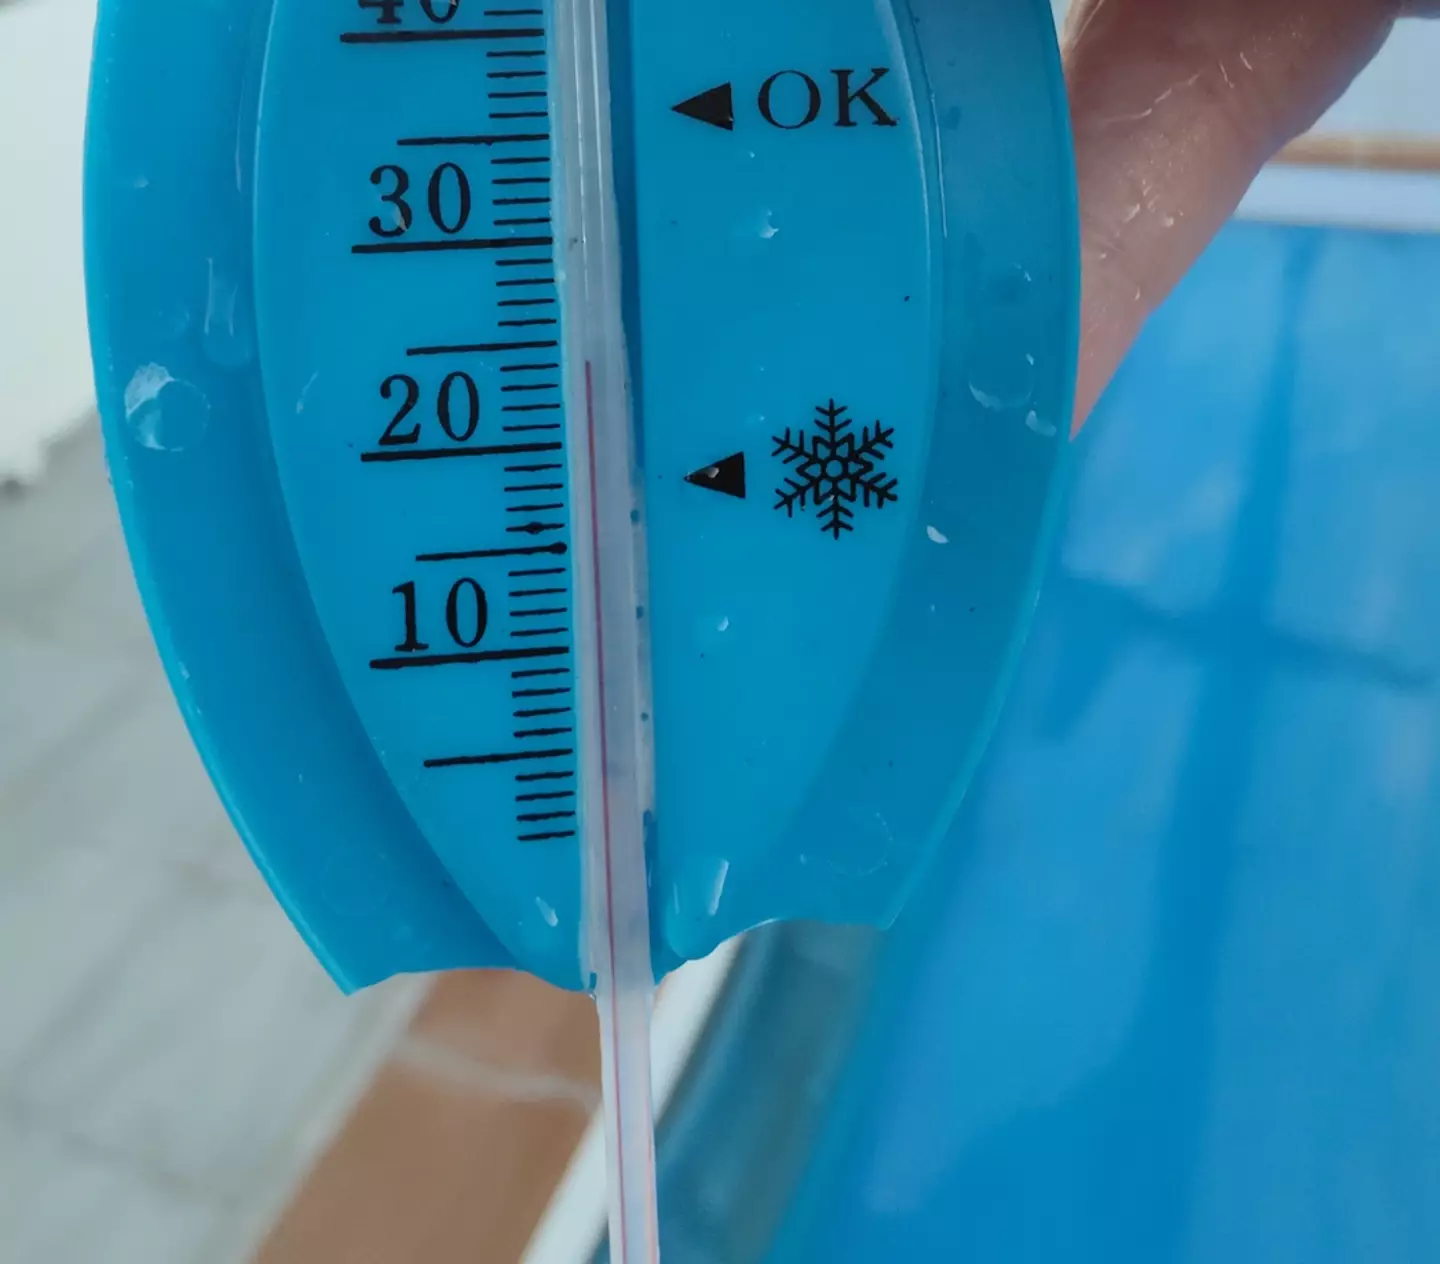 Gulnara measured the temperature of the pool with a thermometer.